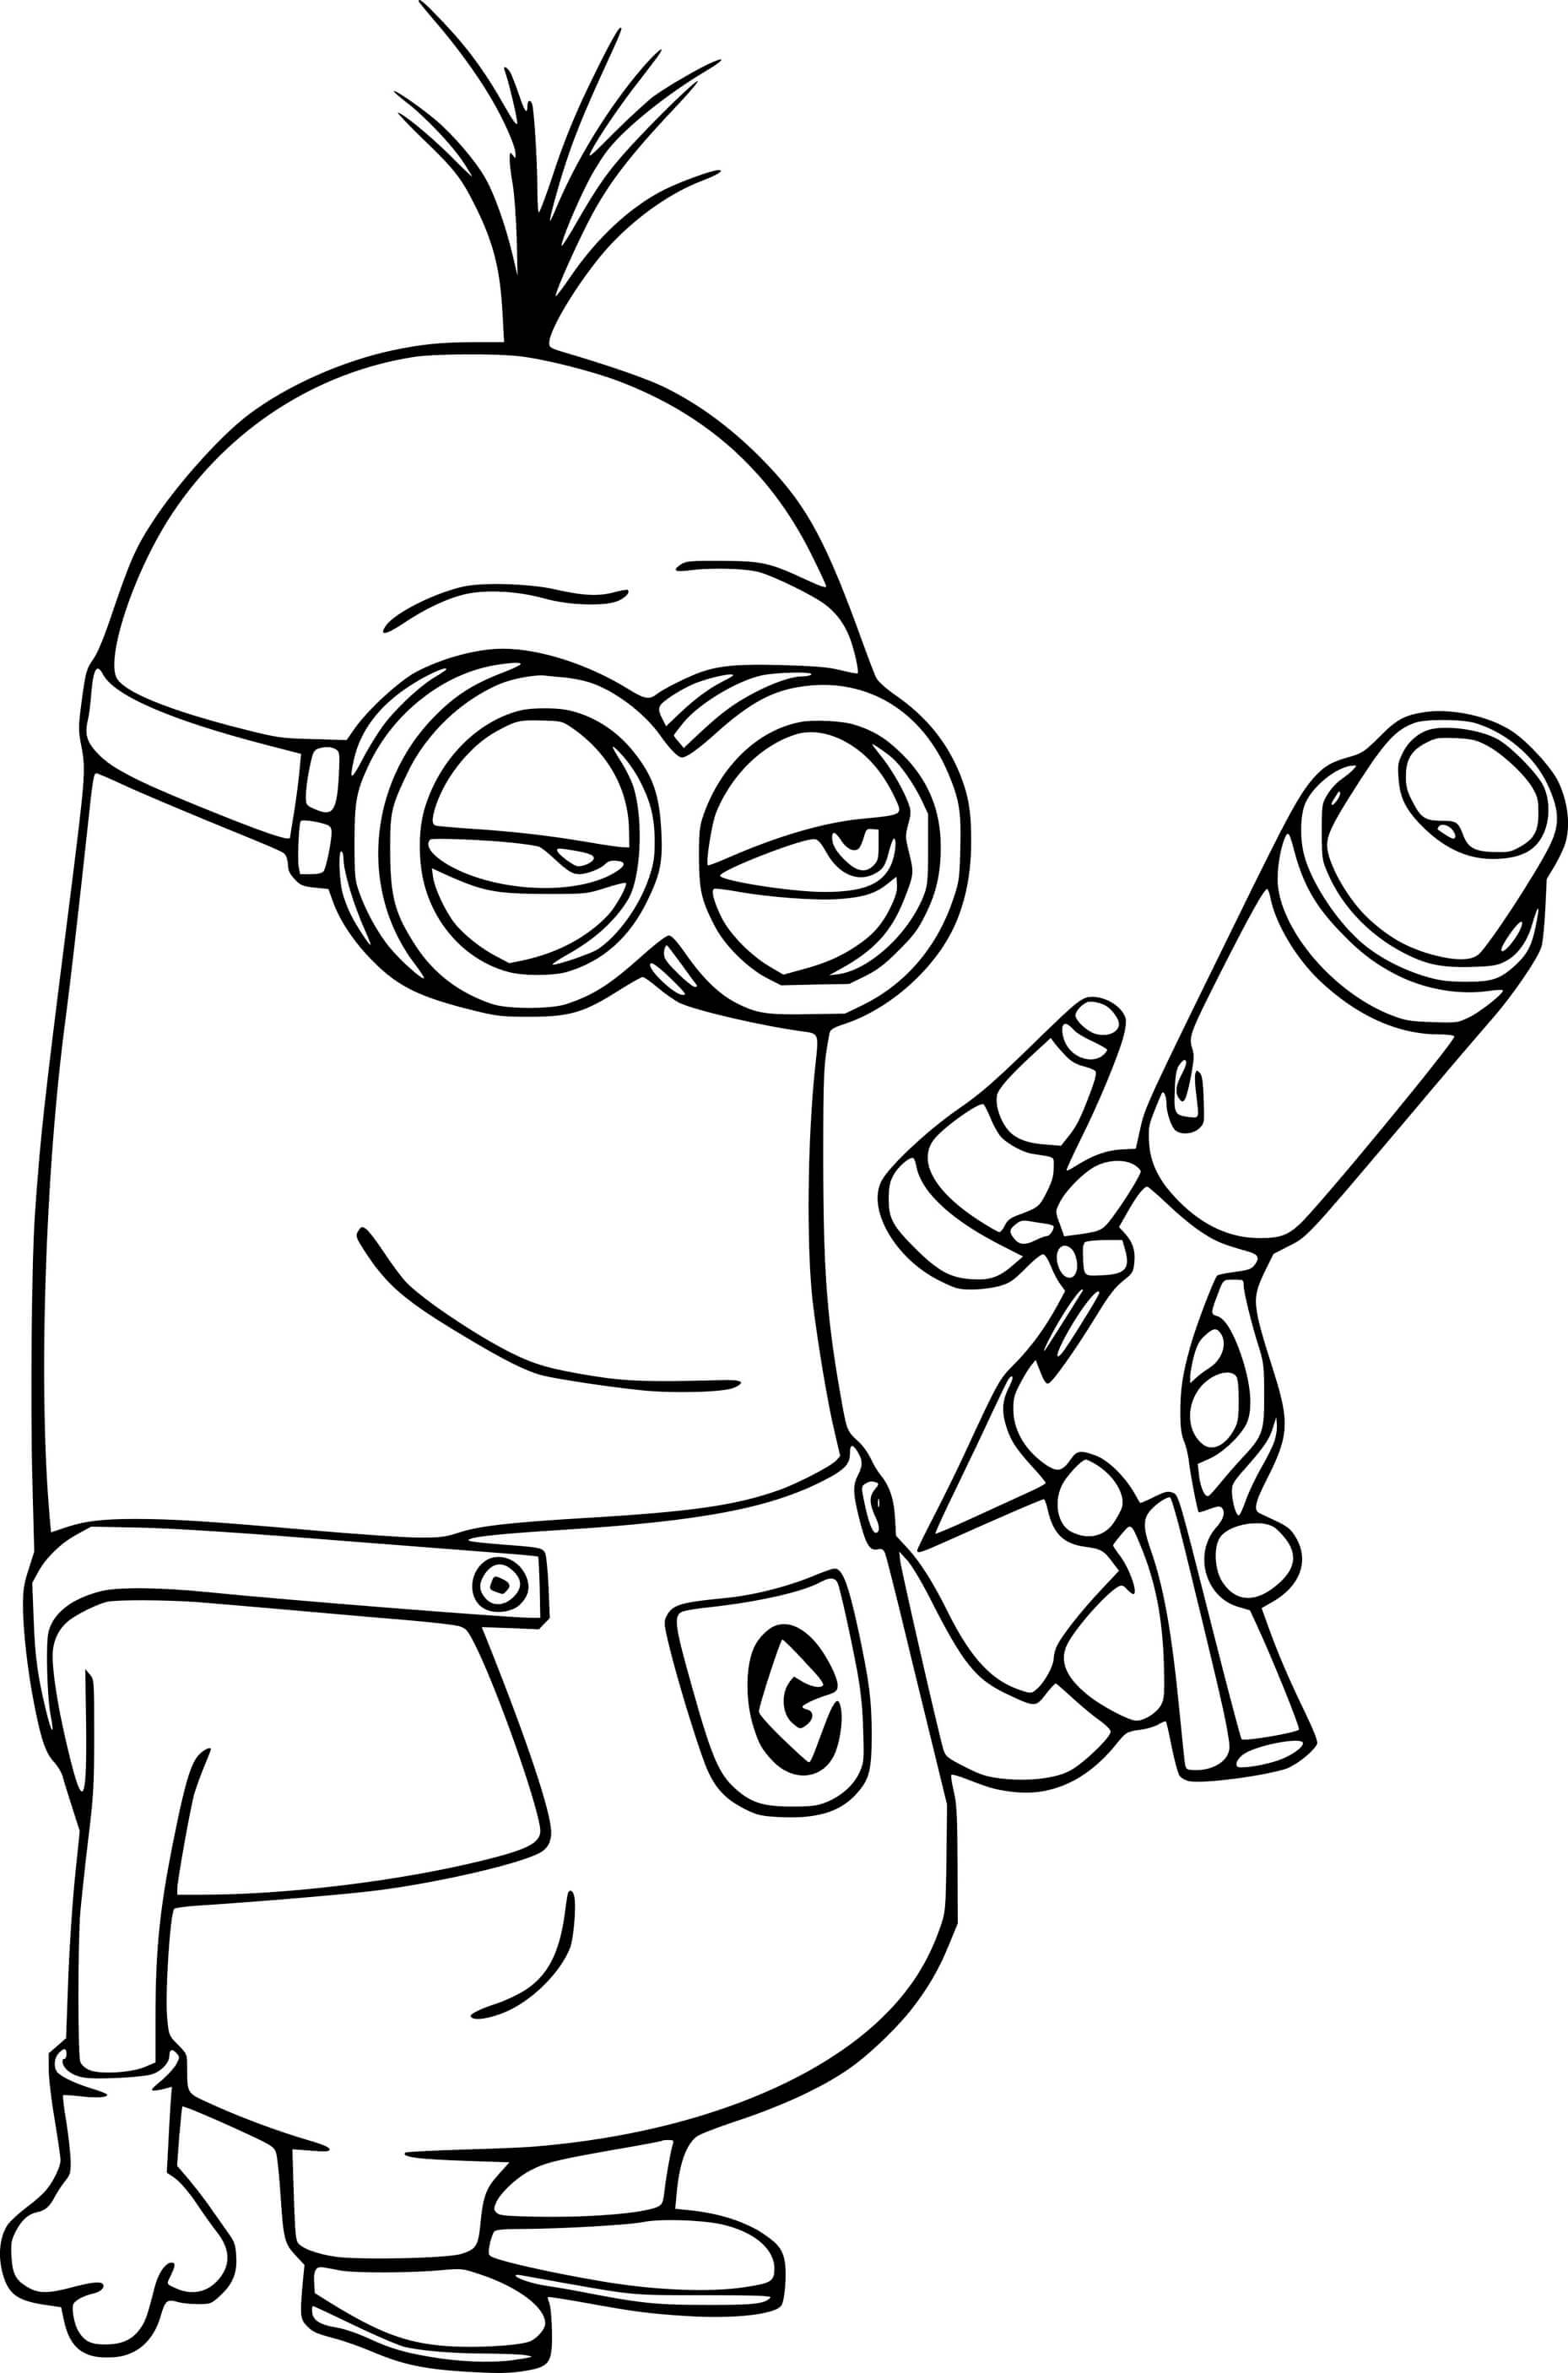 Tim Holds A Gun Coloring Page